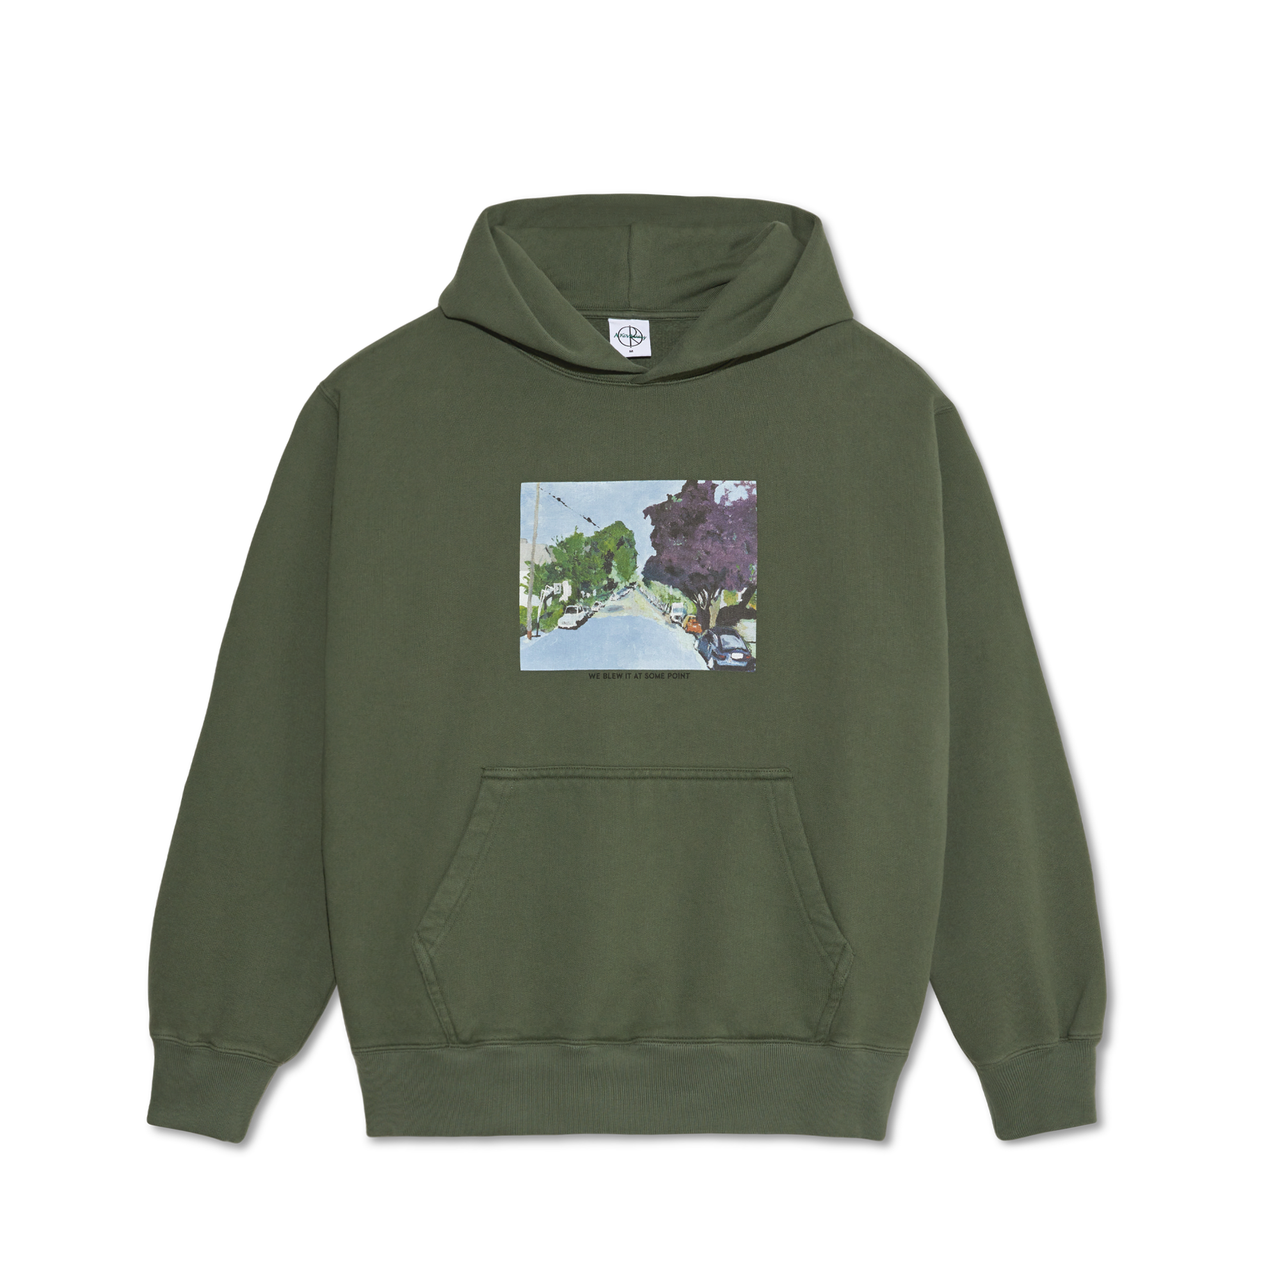 Ed Hoodie | We Blew It At Some Point - Grey Green